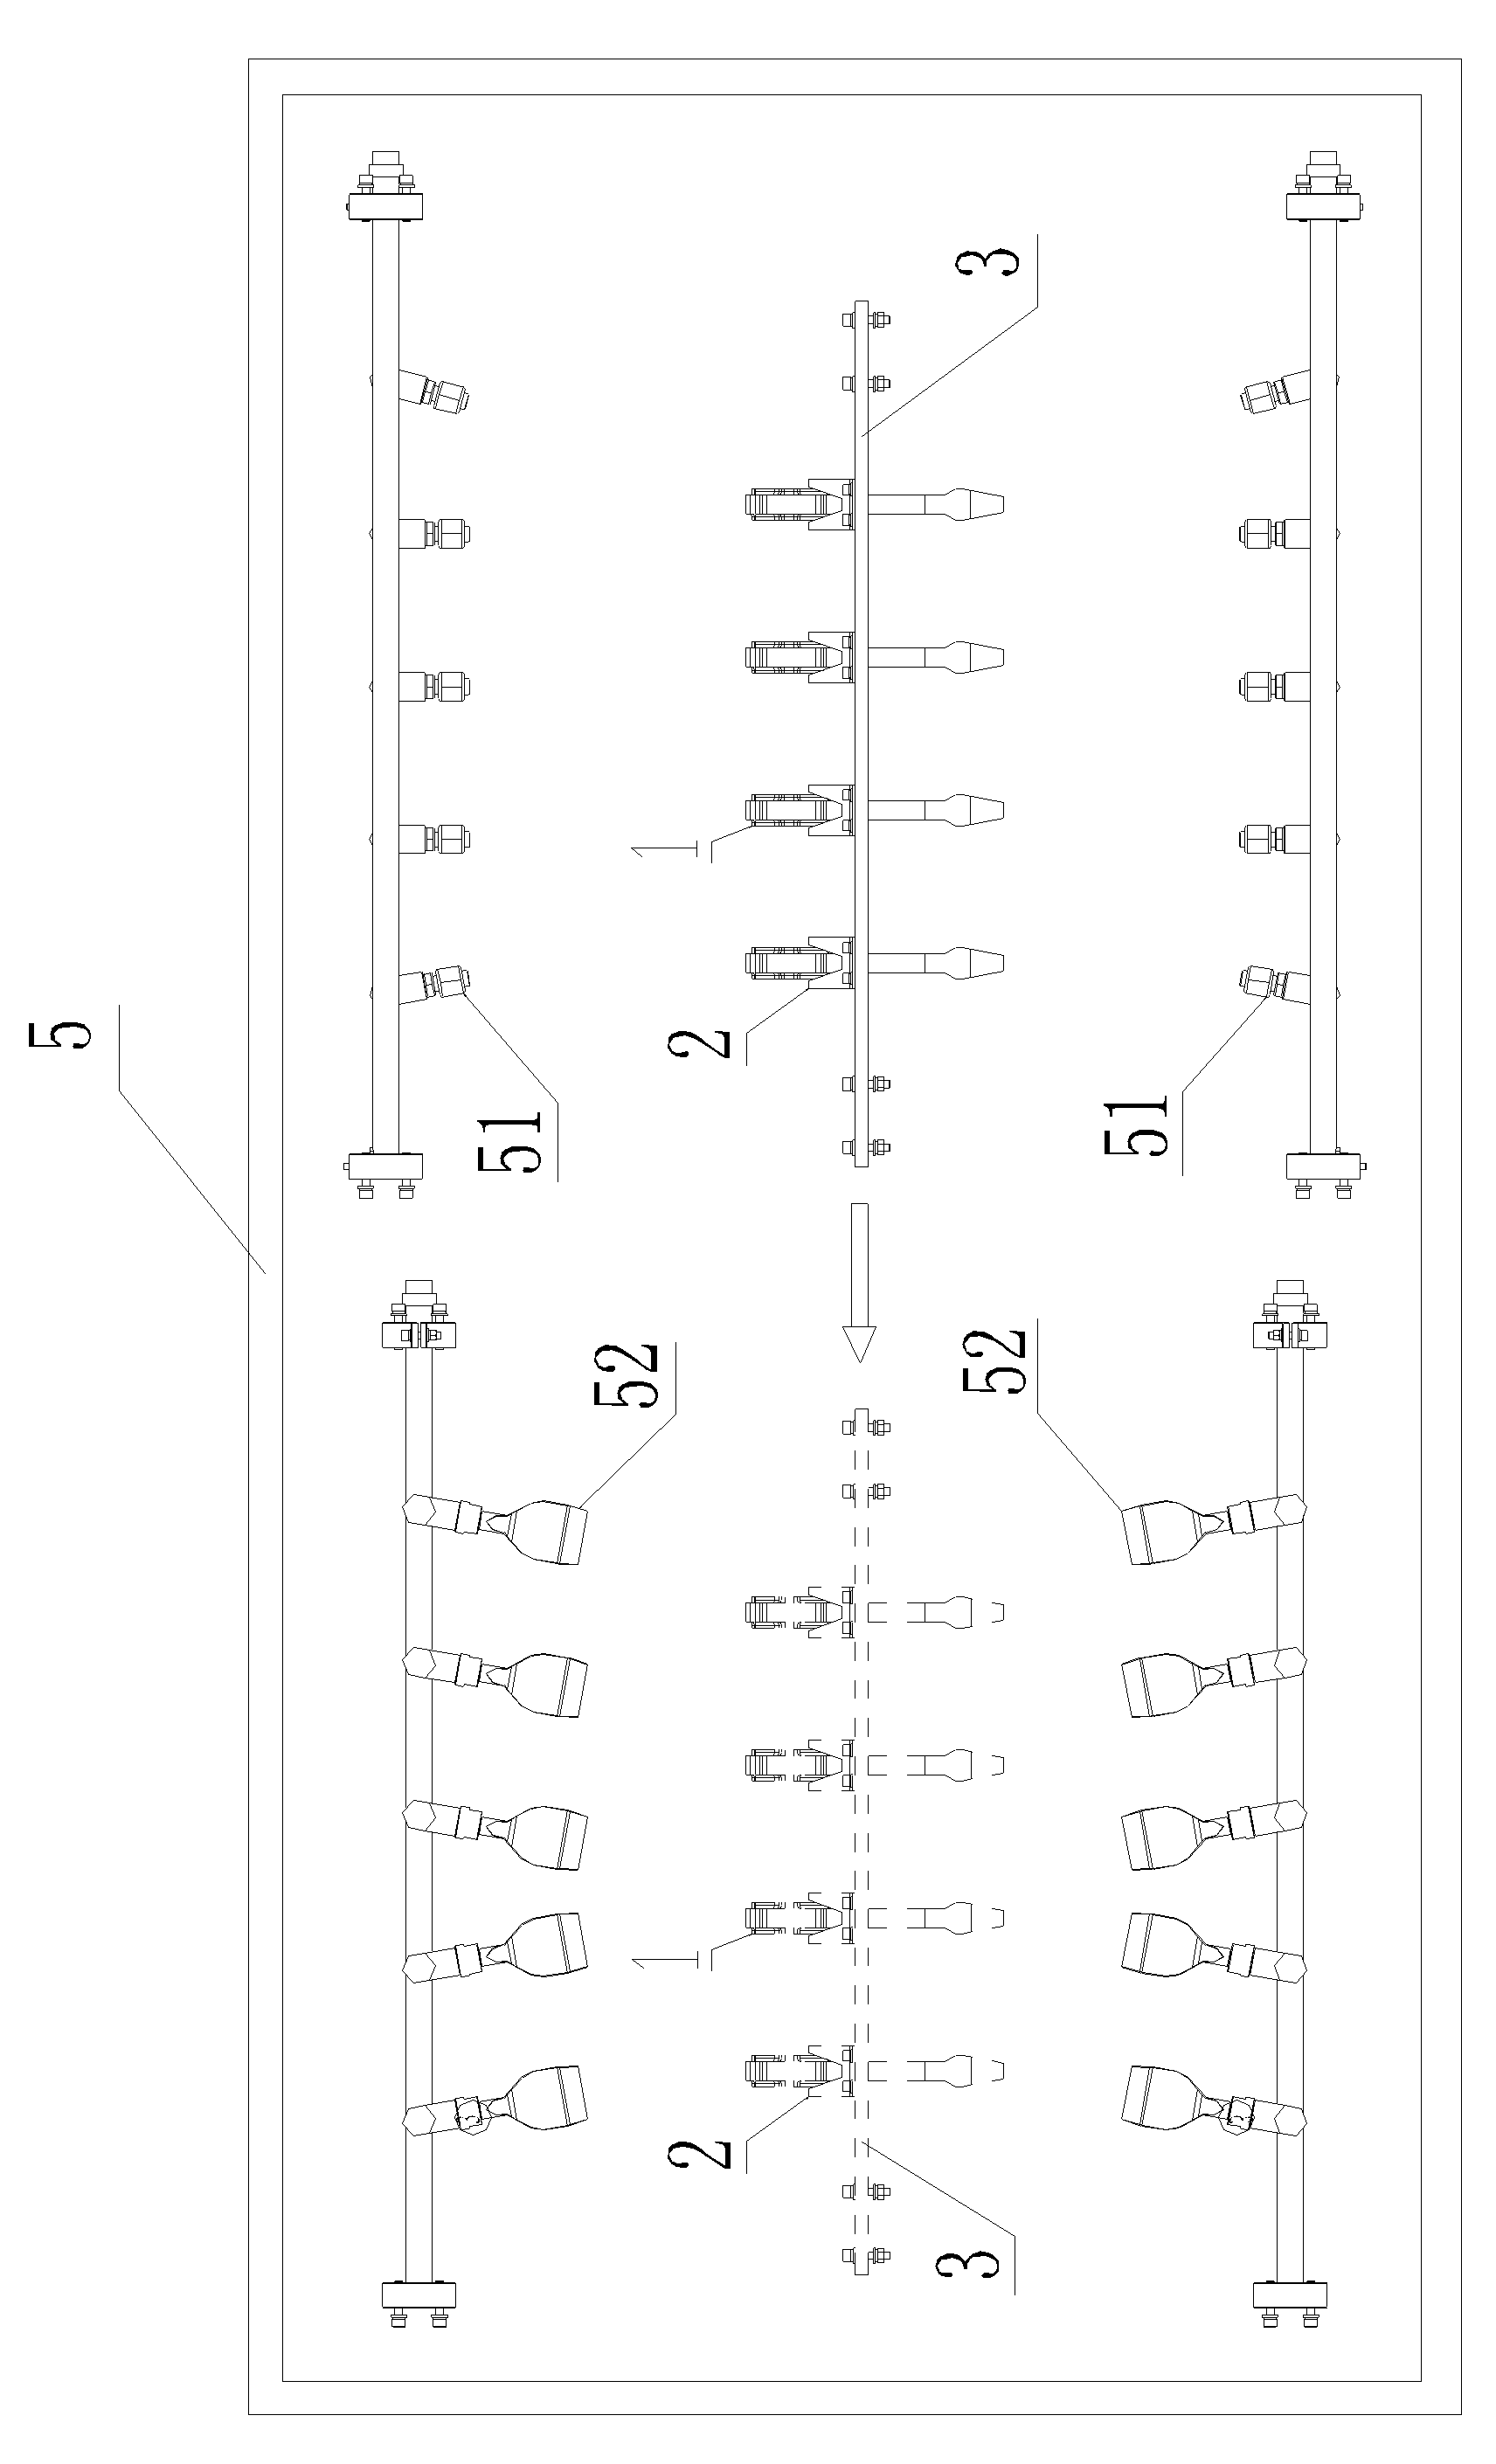 Antirust process for connecting rod of automotive engine